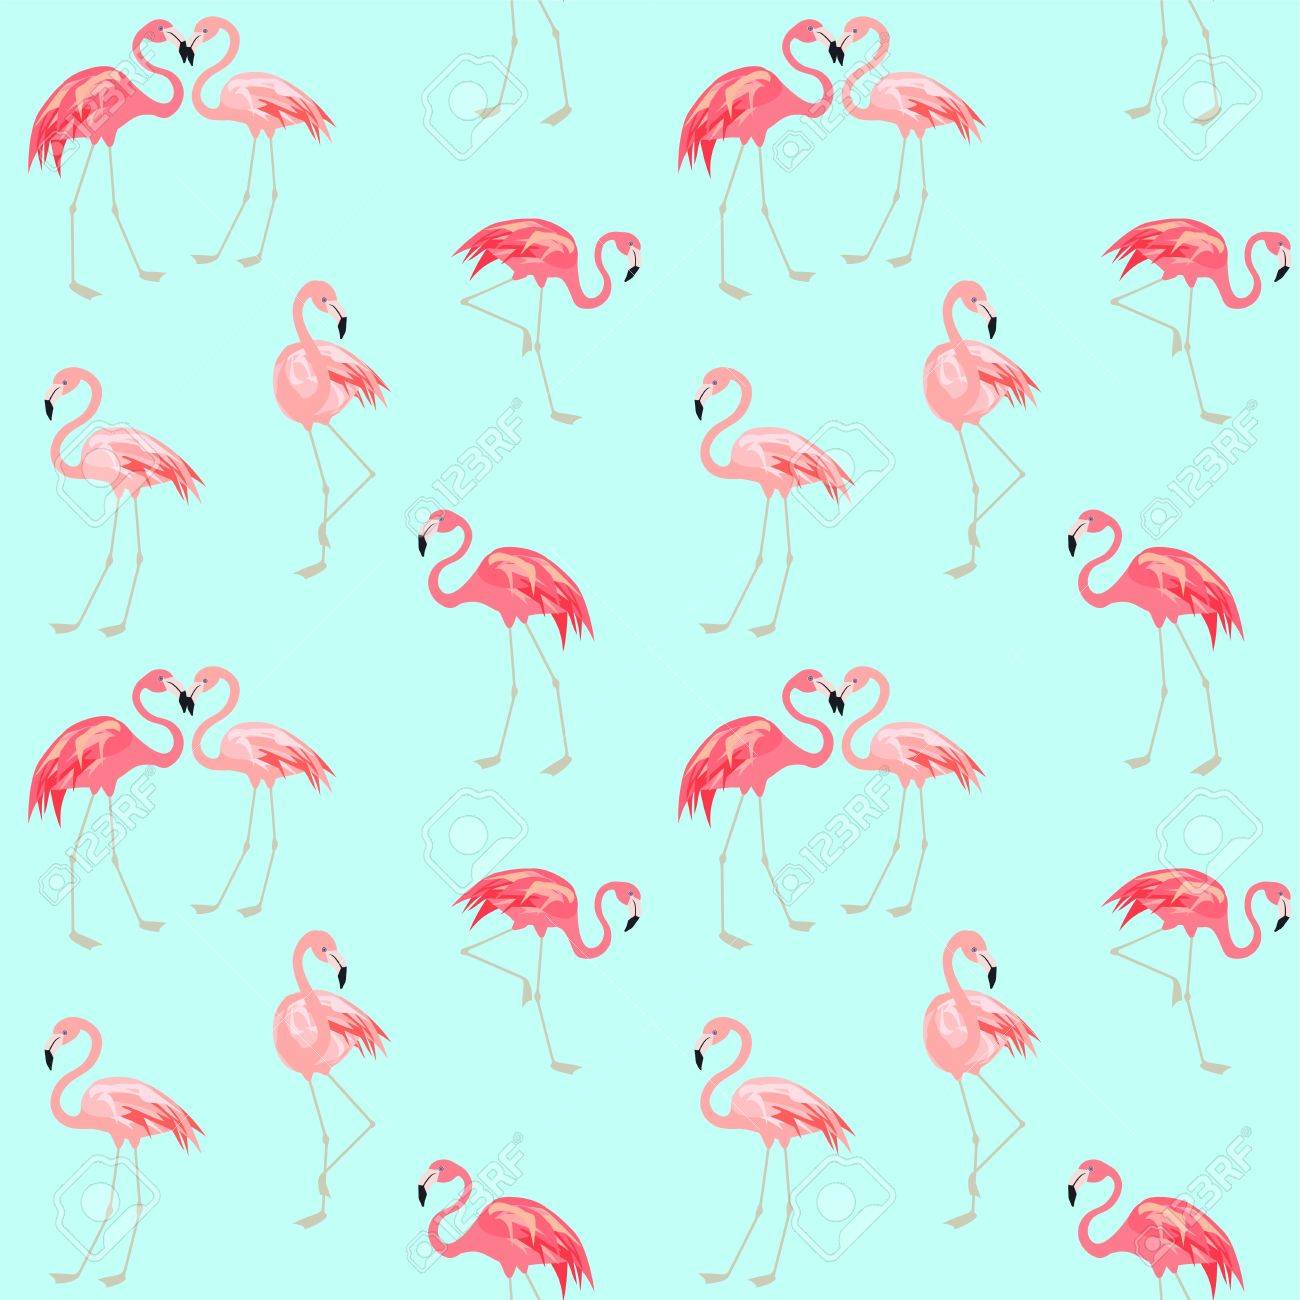 🔥 Download Wallpaper With Cute Pink Flamingo Royalty Cliparts By Cruiz